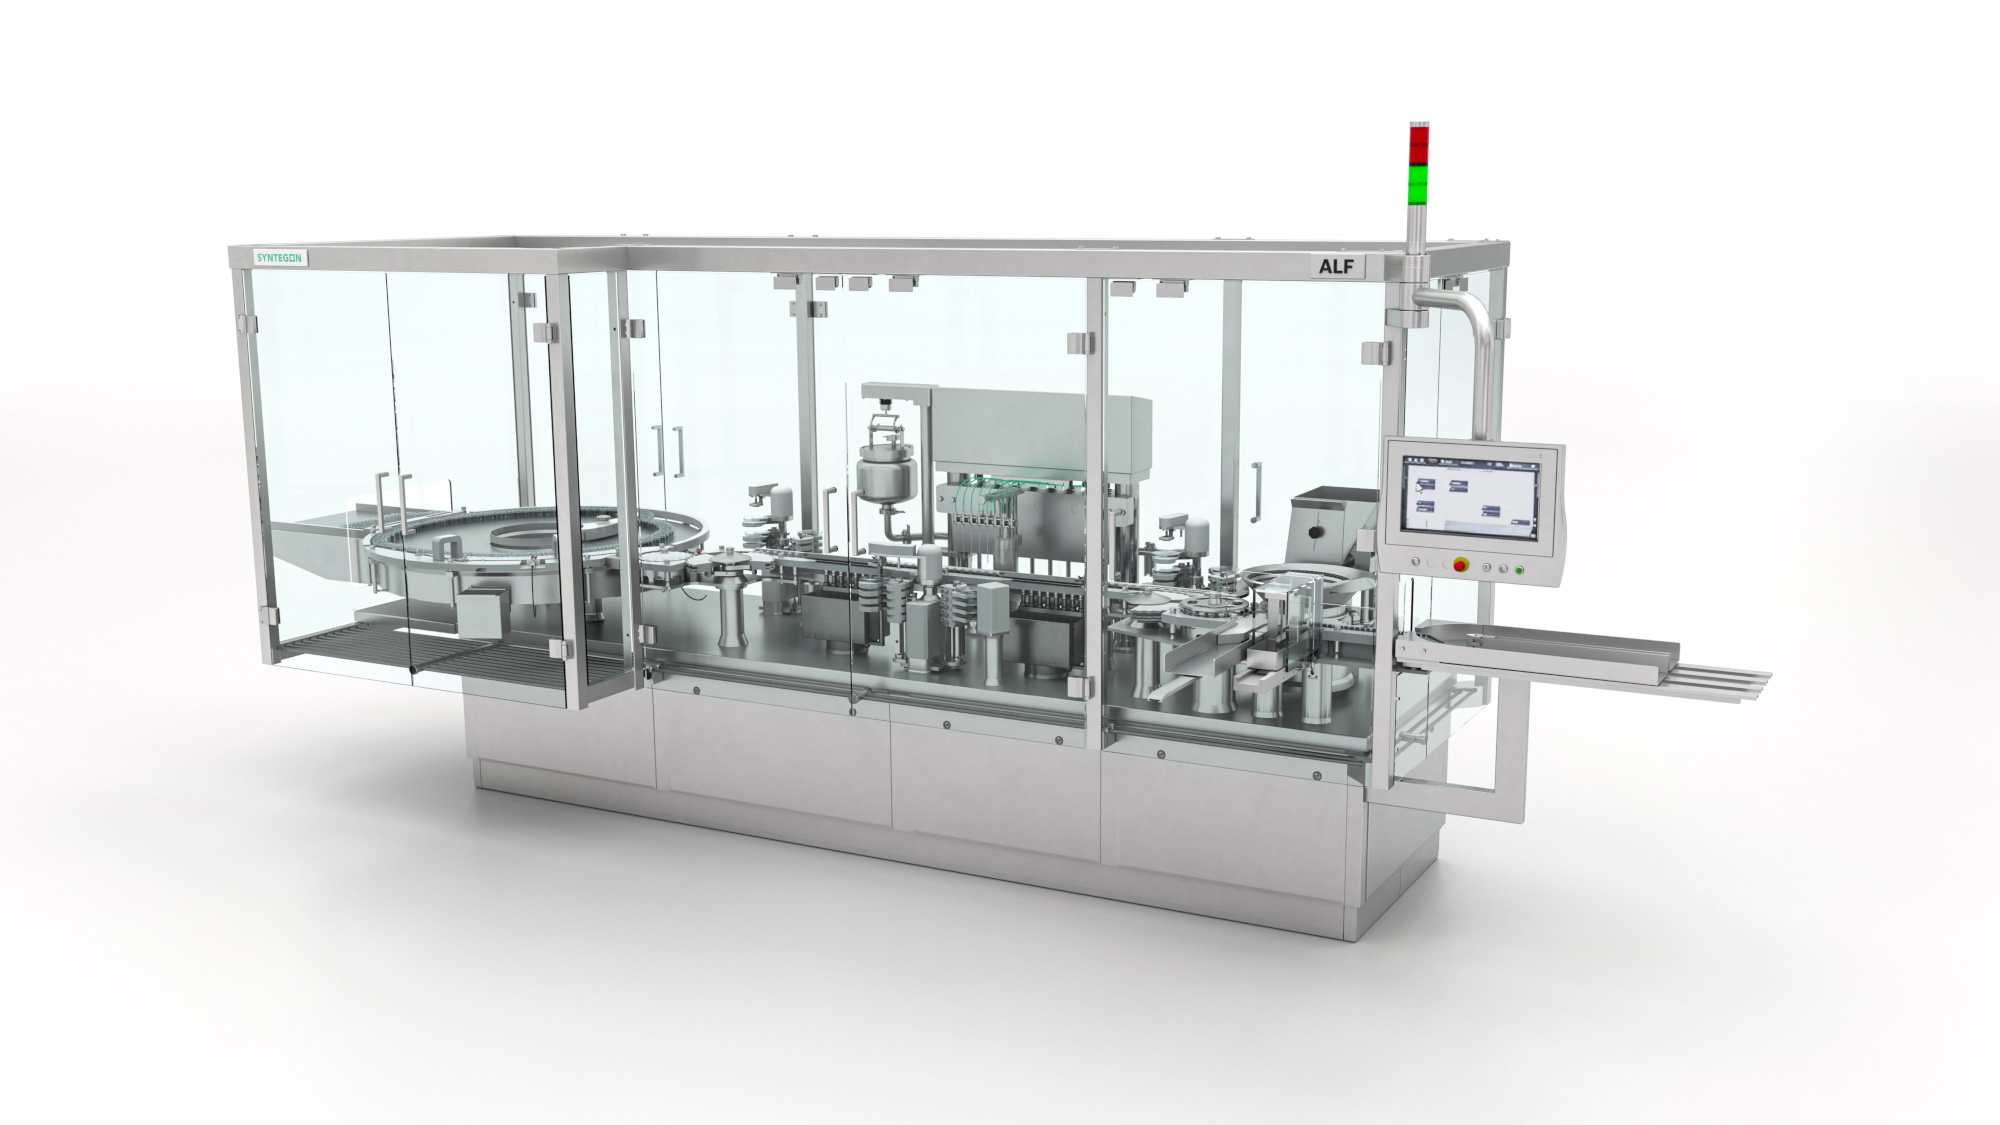 The remarkably successful ALF 5000 V platform offers new features to help pharmaceutical manufacturers achieve high yields and accurate filling processes.